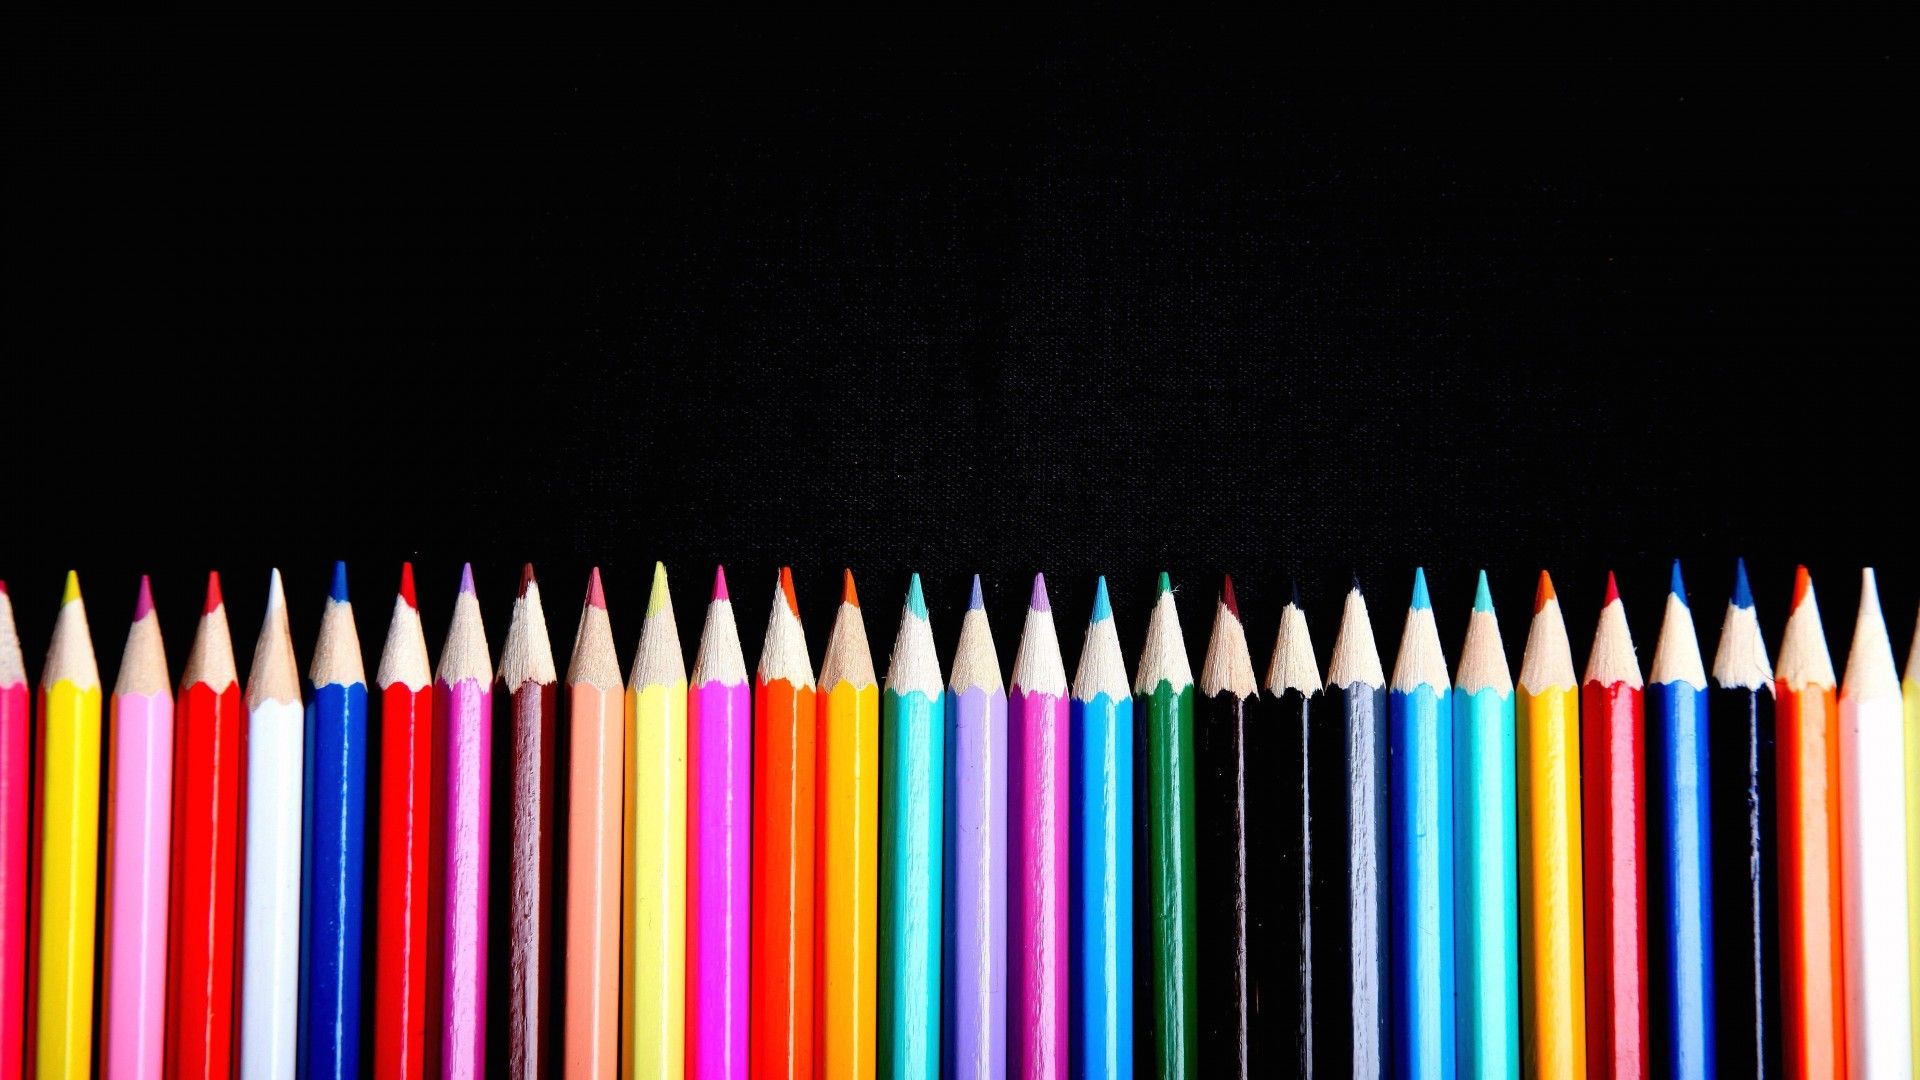 Pencils Image Colored HD Wallpaper And Background Photos